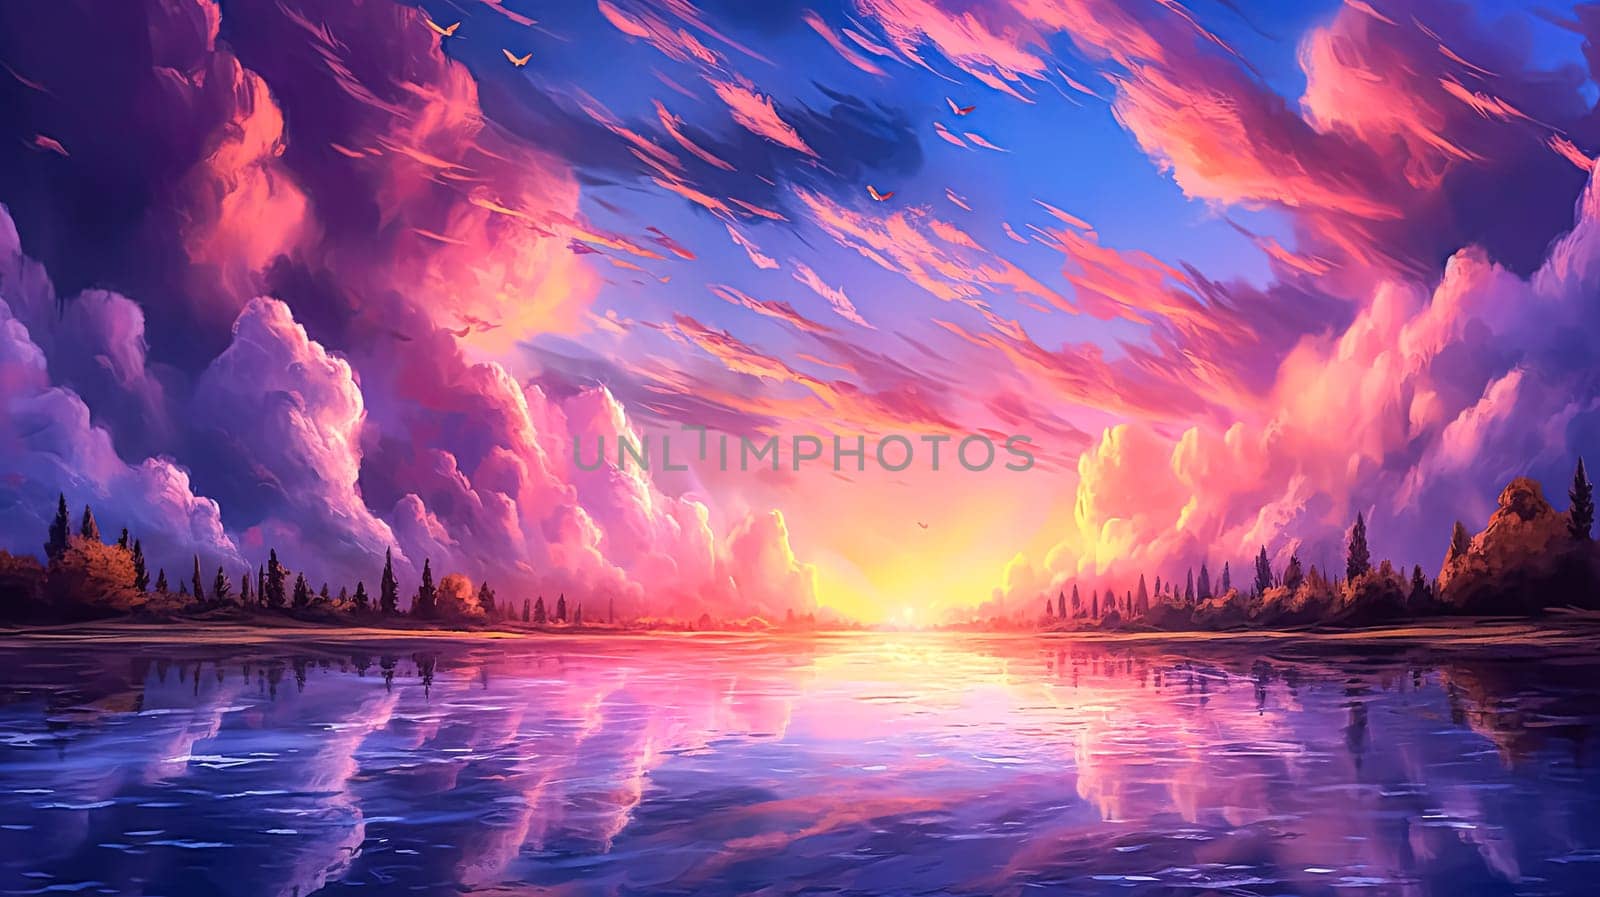 A beautiful painting of a sunset over a lake with a reflection of the sky on the water. The mood of the painting is serene and peaceful